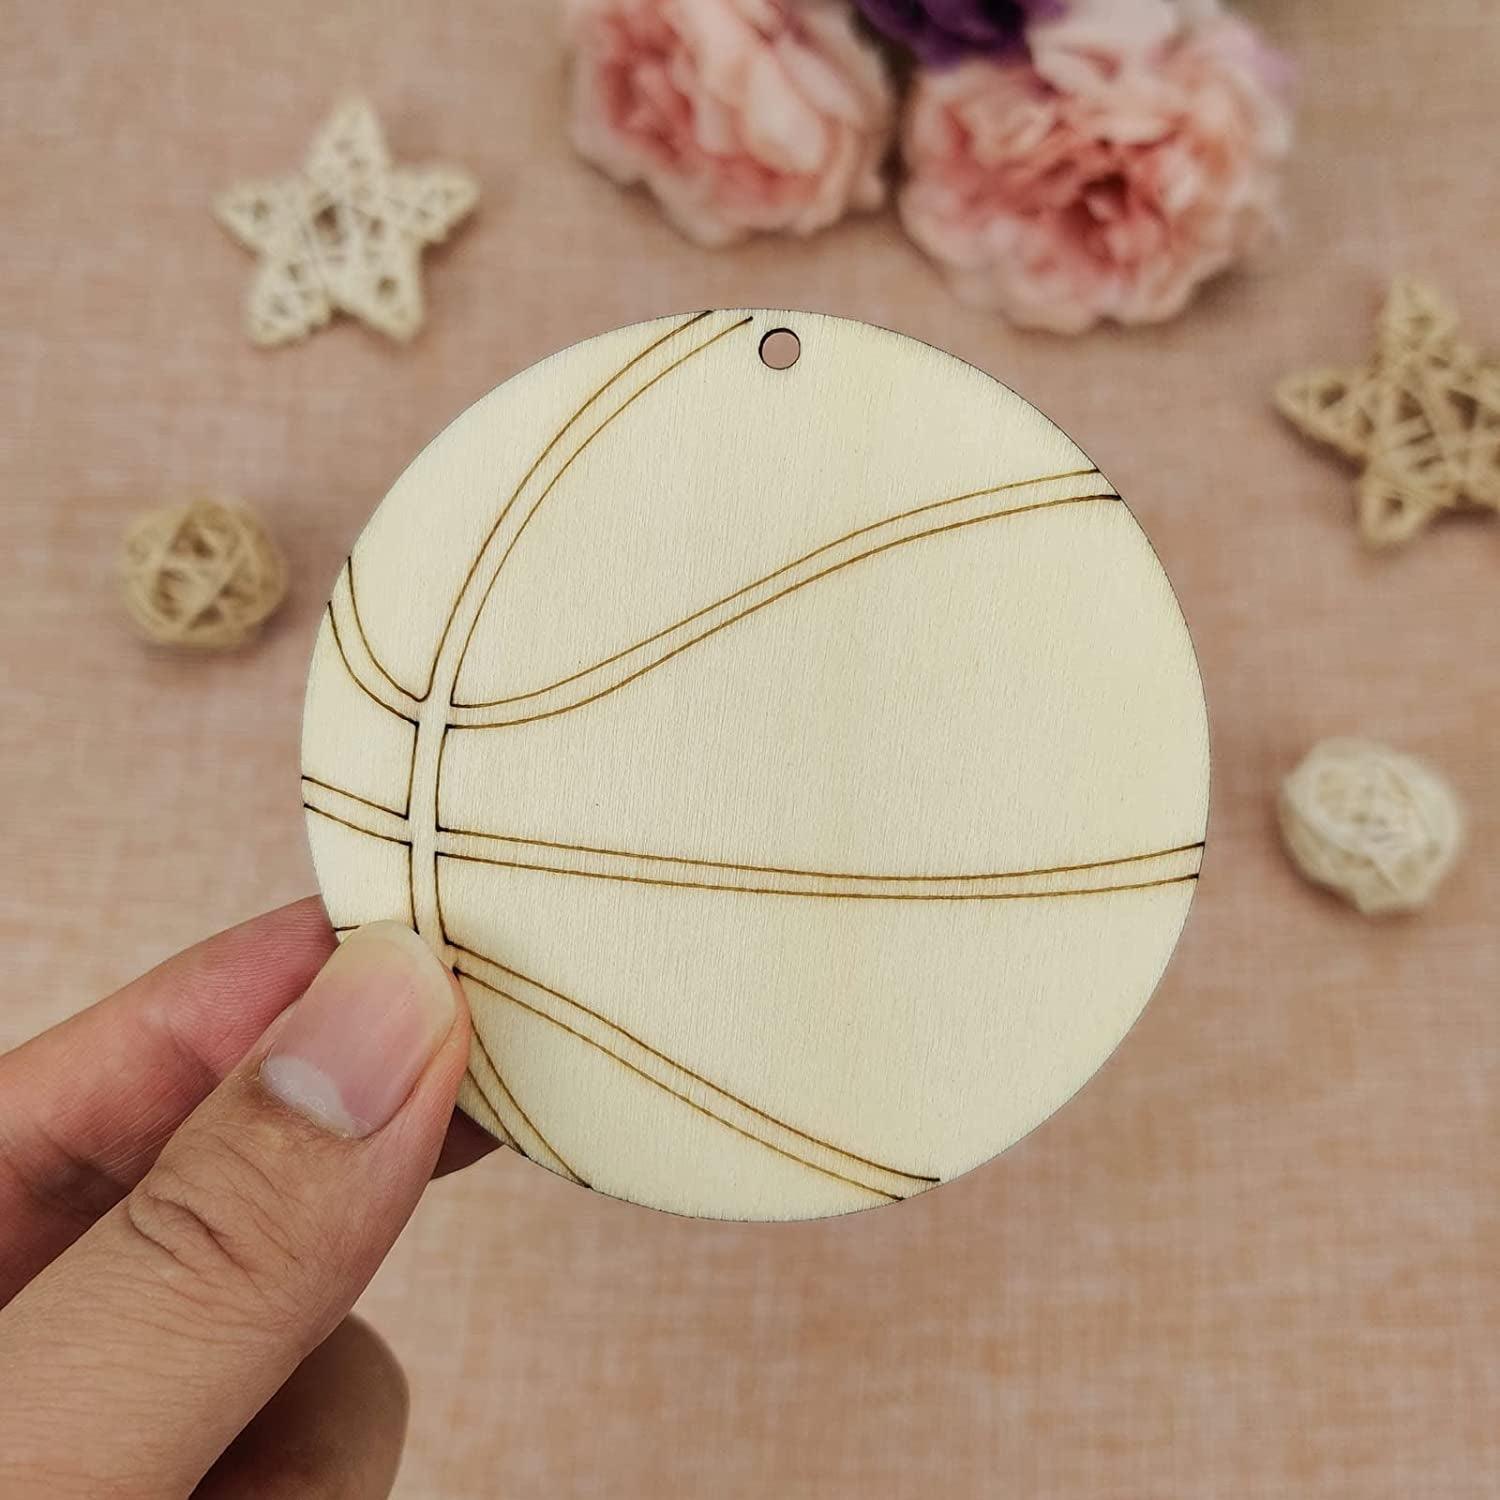 20Pcs Basketball Wood DIY Crafts Cutouts Wooden Basketball Shaped Hanging Ornaments Gift Tags with Twines for DIY Project - WoodArtSupply